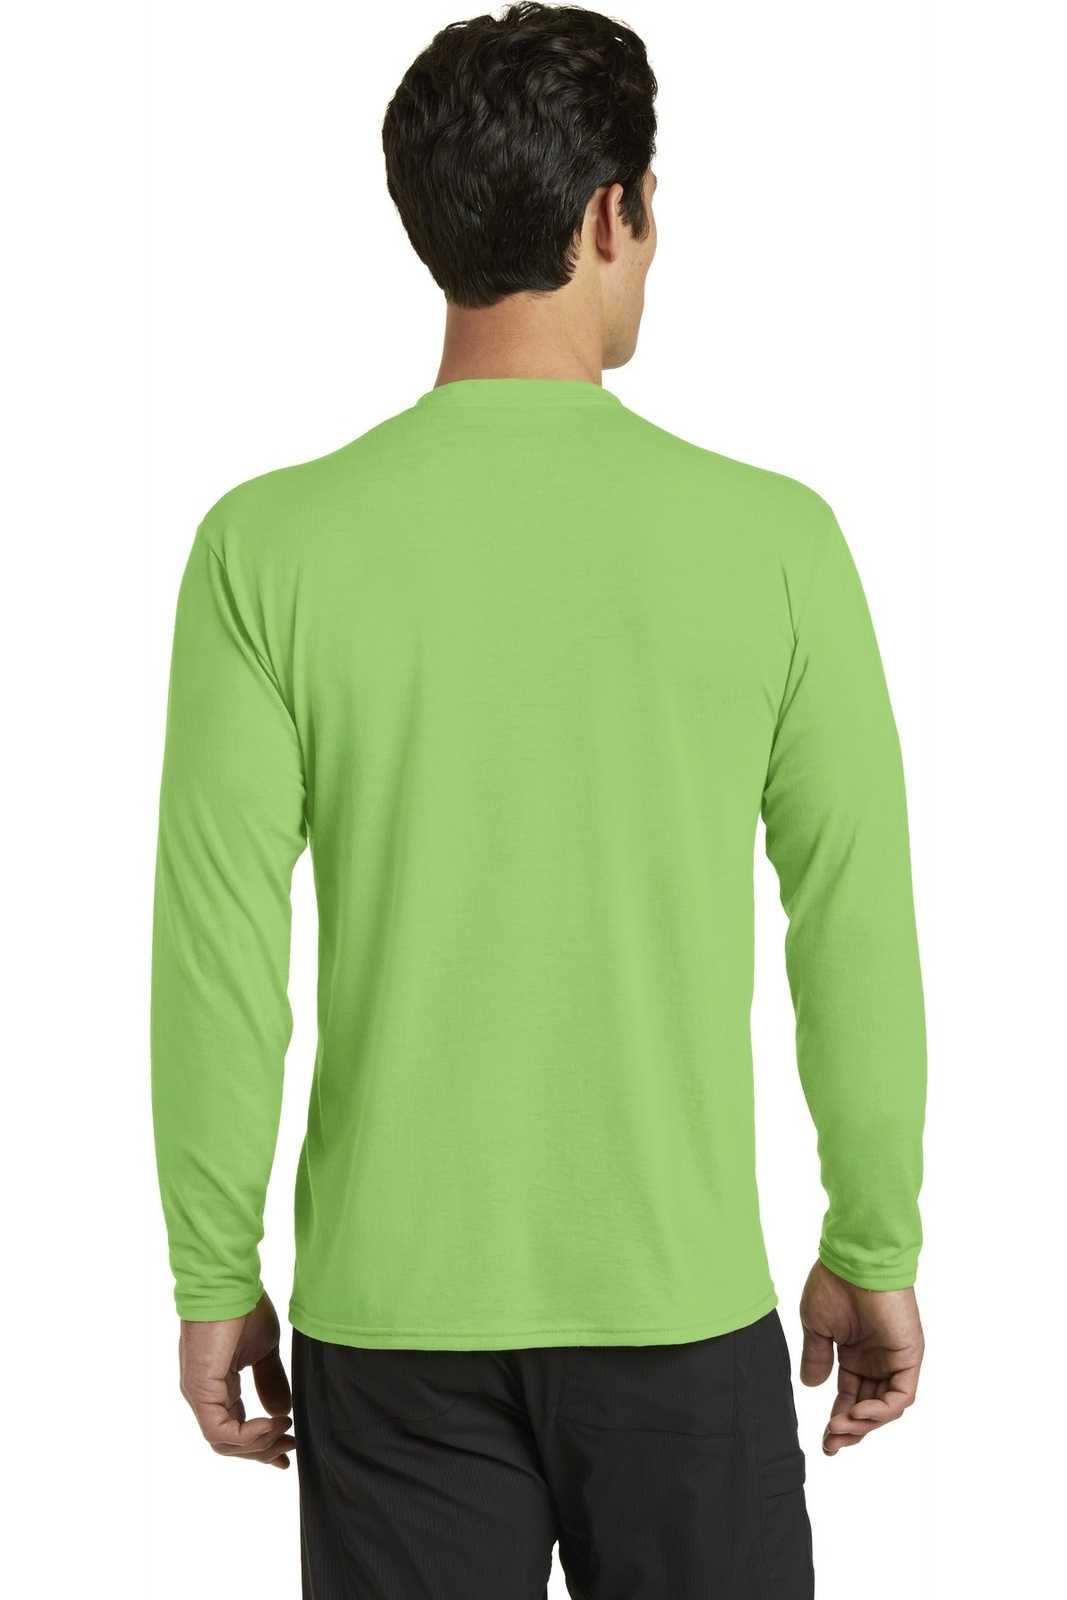 Port &amp; Company PC381LS Long Sleeve Performance Blend Tee - Lime - HIT a Double - 2